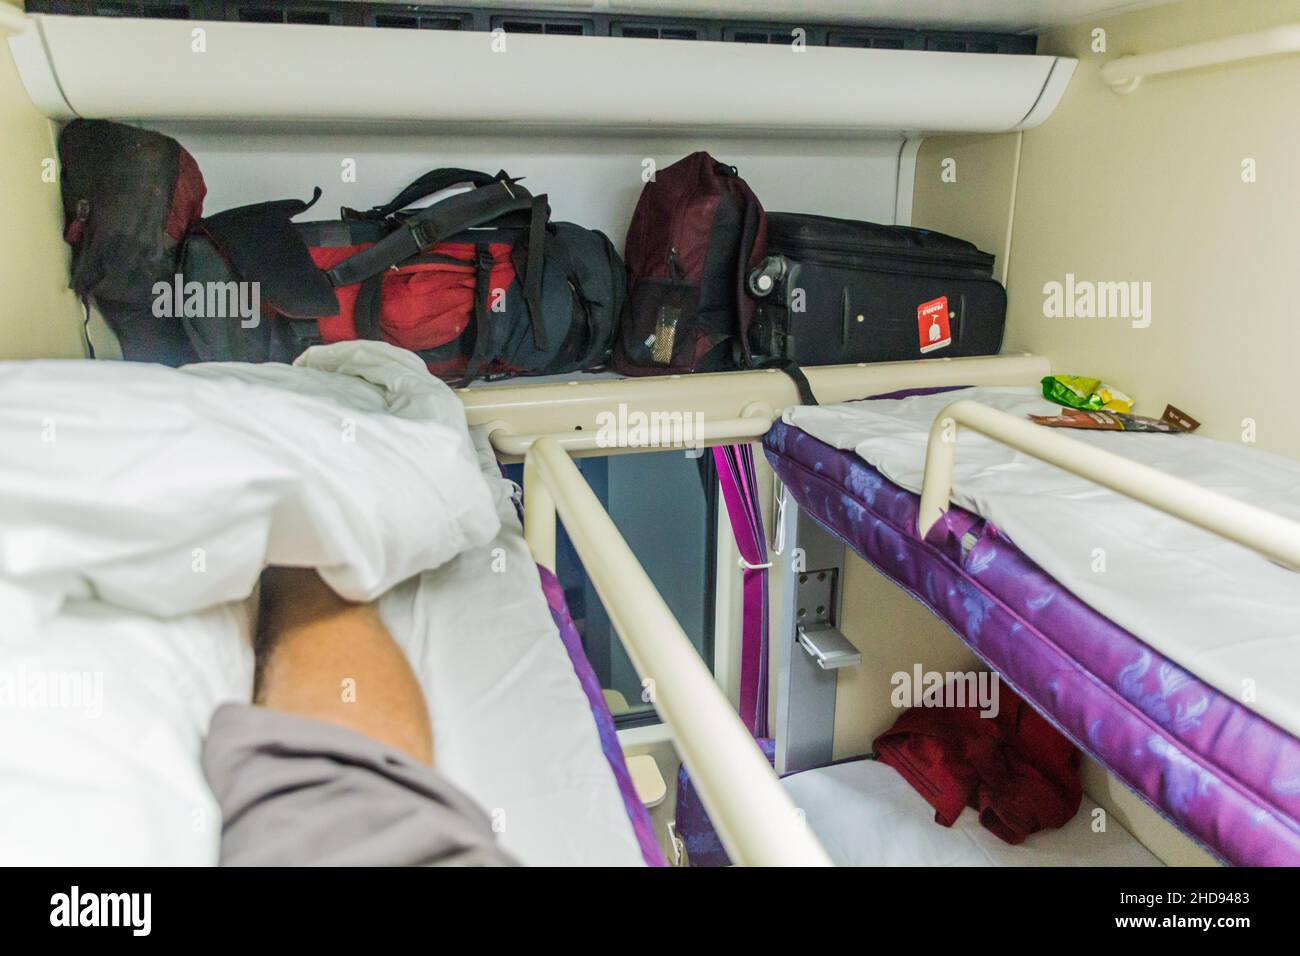 LANZHOU, CHINA - AUGUST 25, 2018: Upper bunks of Hard Sleeper class train coach in China. Stock Photo